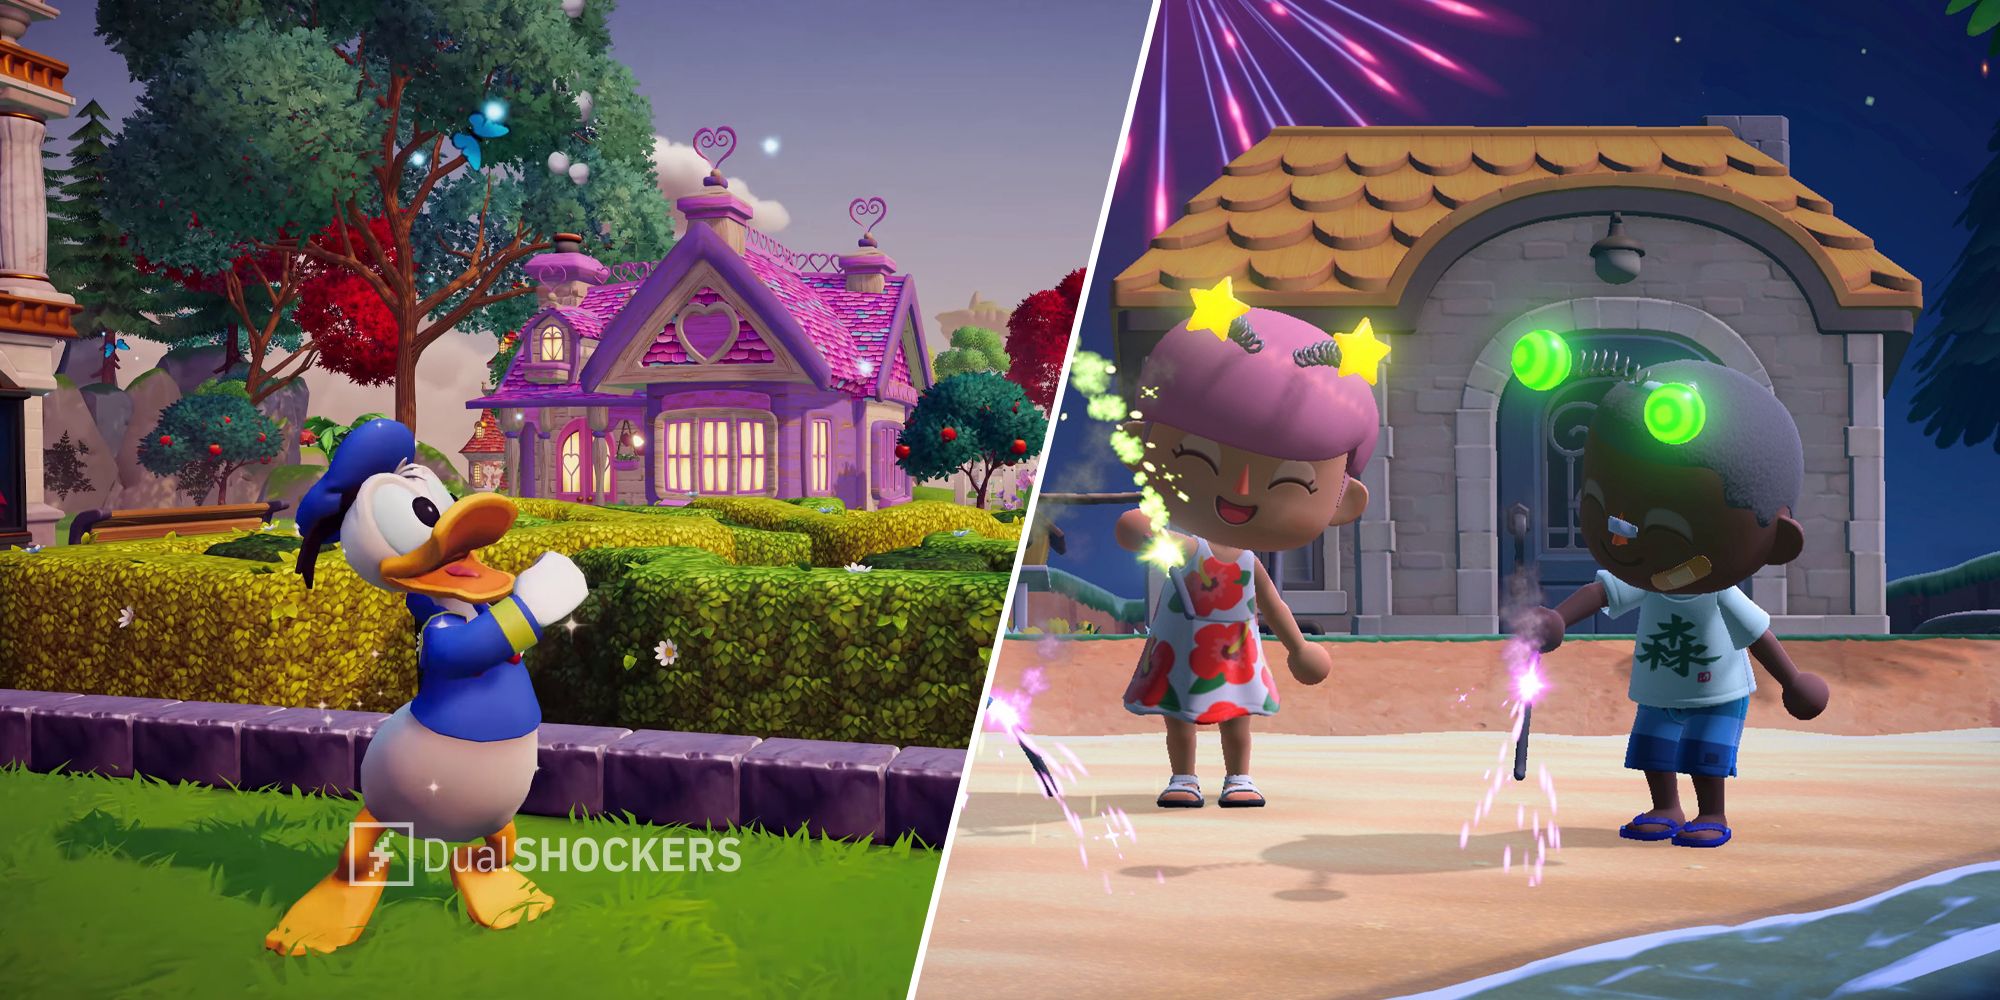 Disney Dreamlight Valley Donald Duck on left, Animal Crossing characters on right